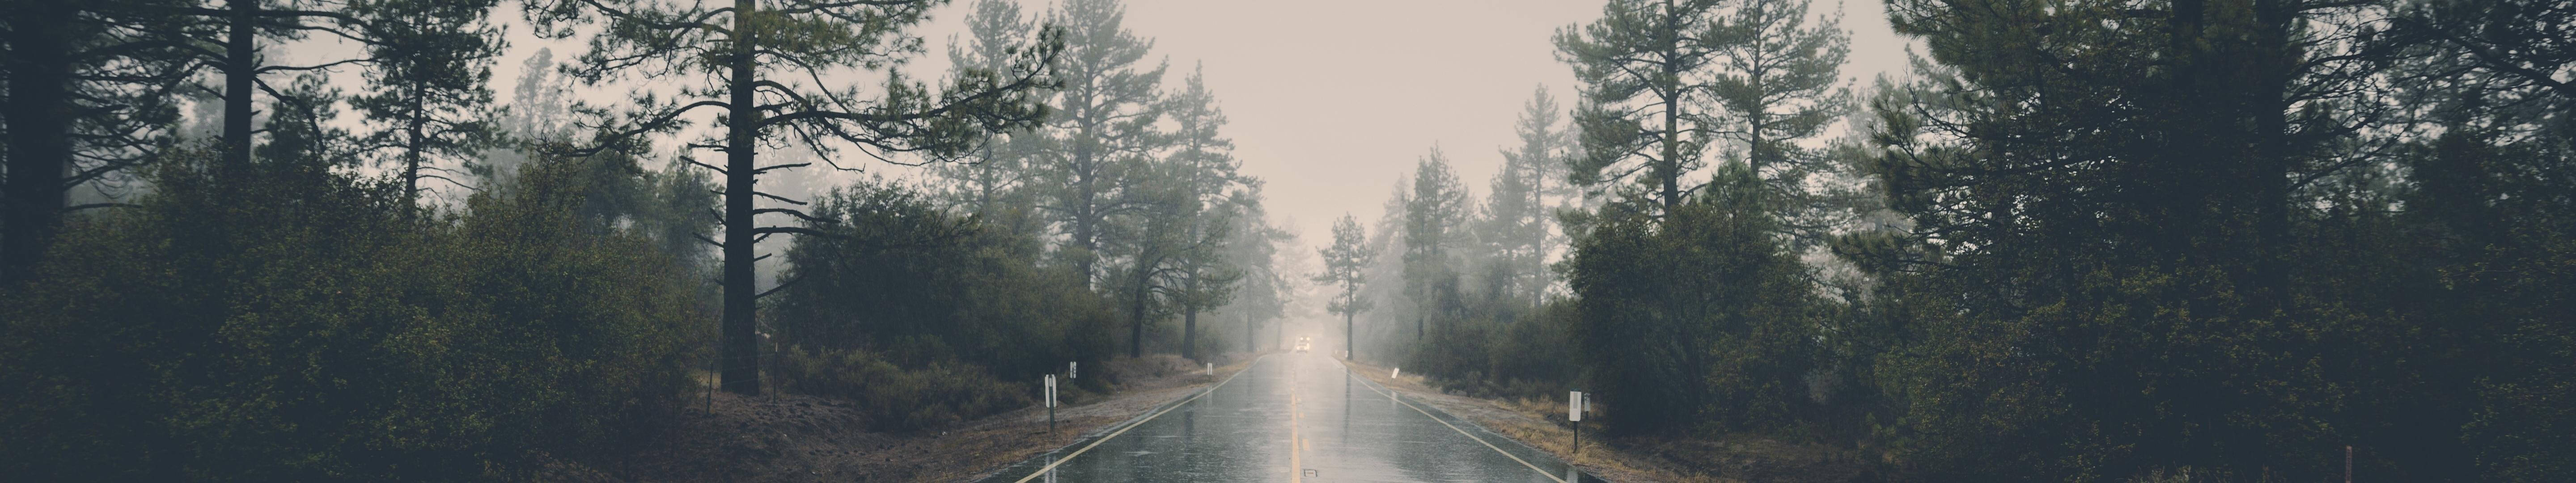 Foggy Country Road Three Screen Wallpaper